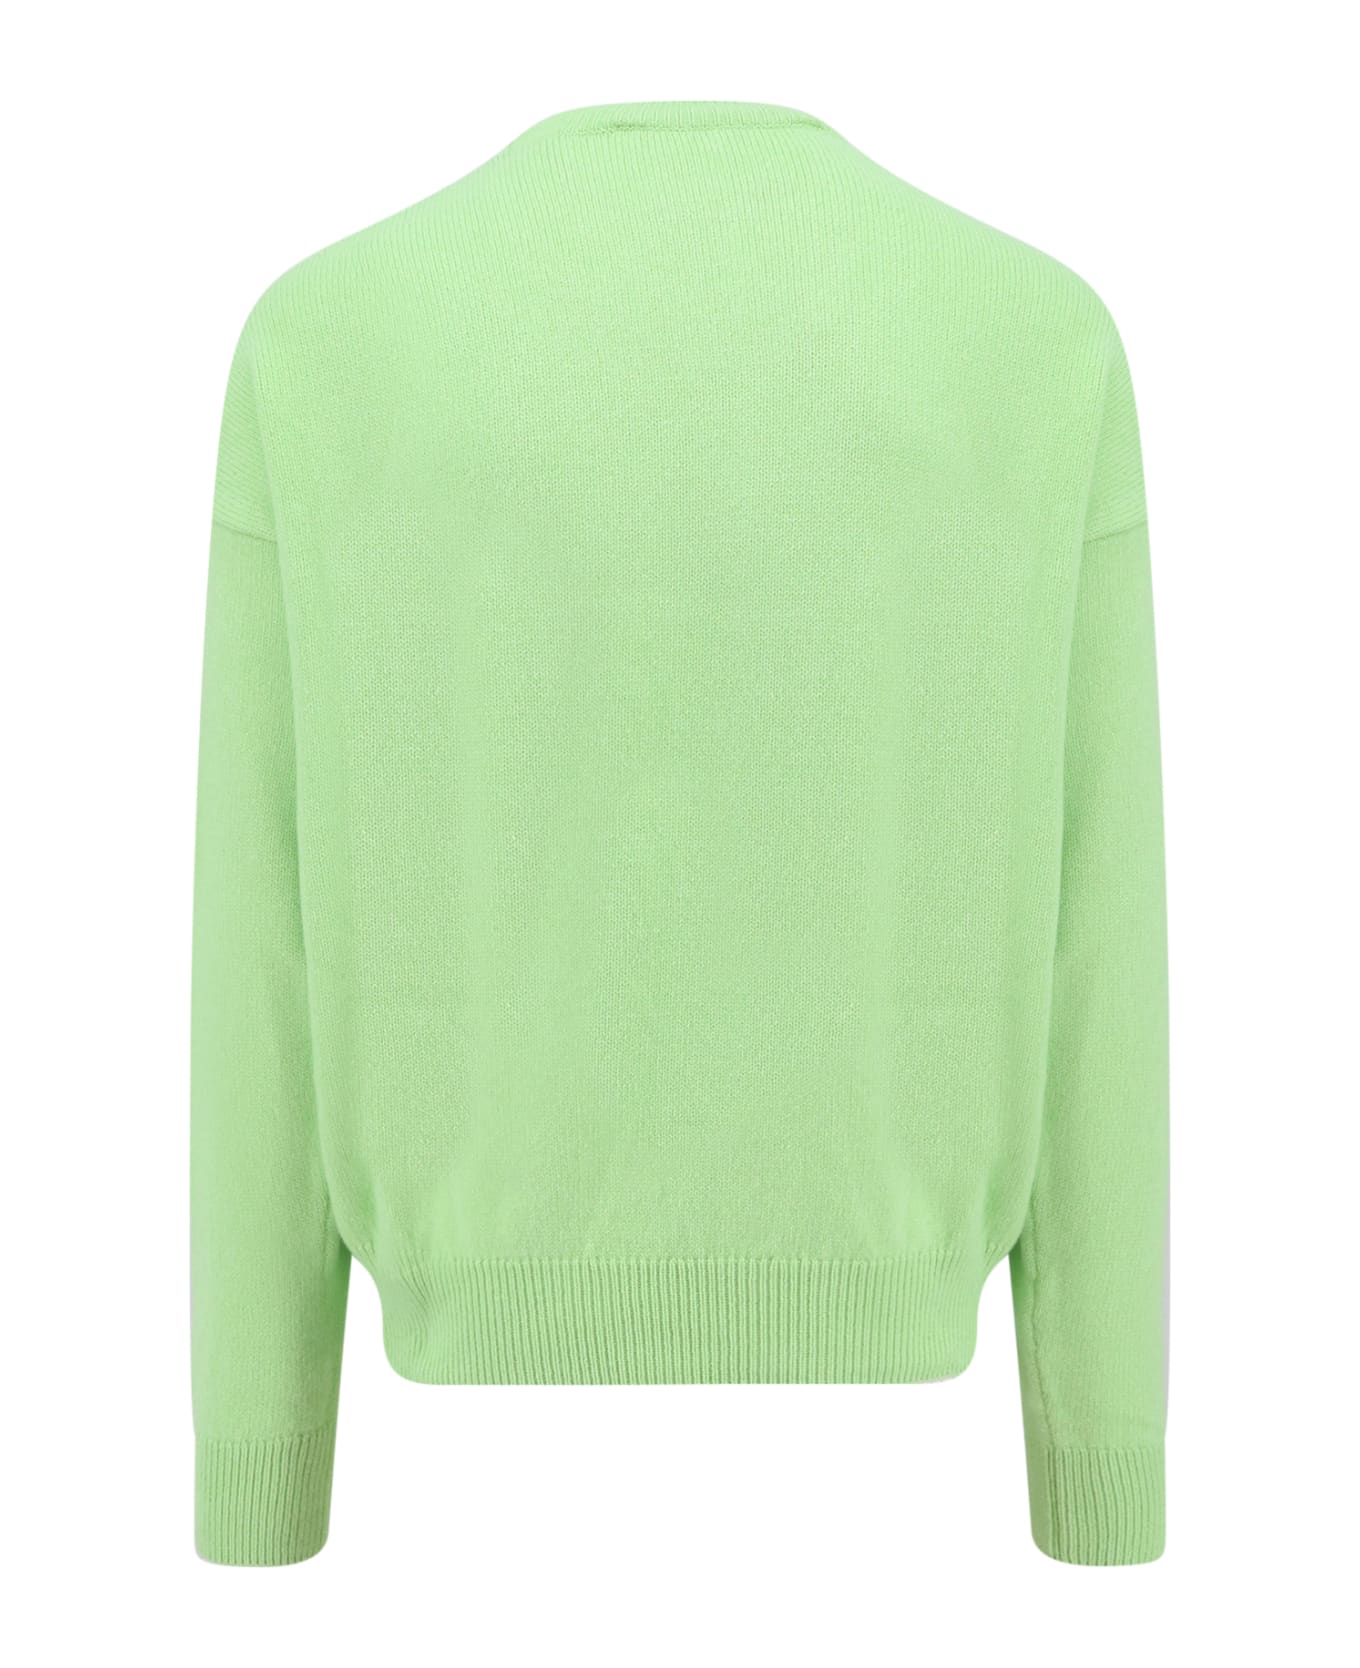 Palm Angels Douby Intarsia Sweater - Green